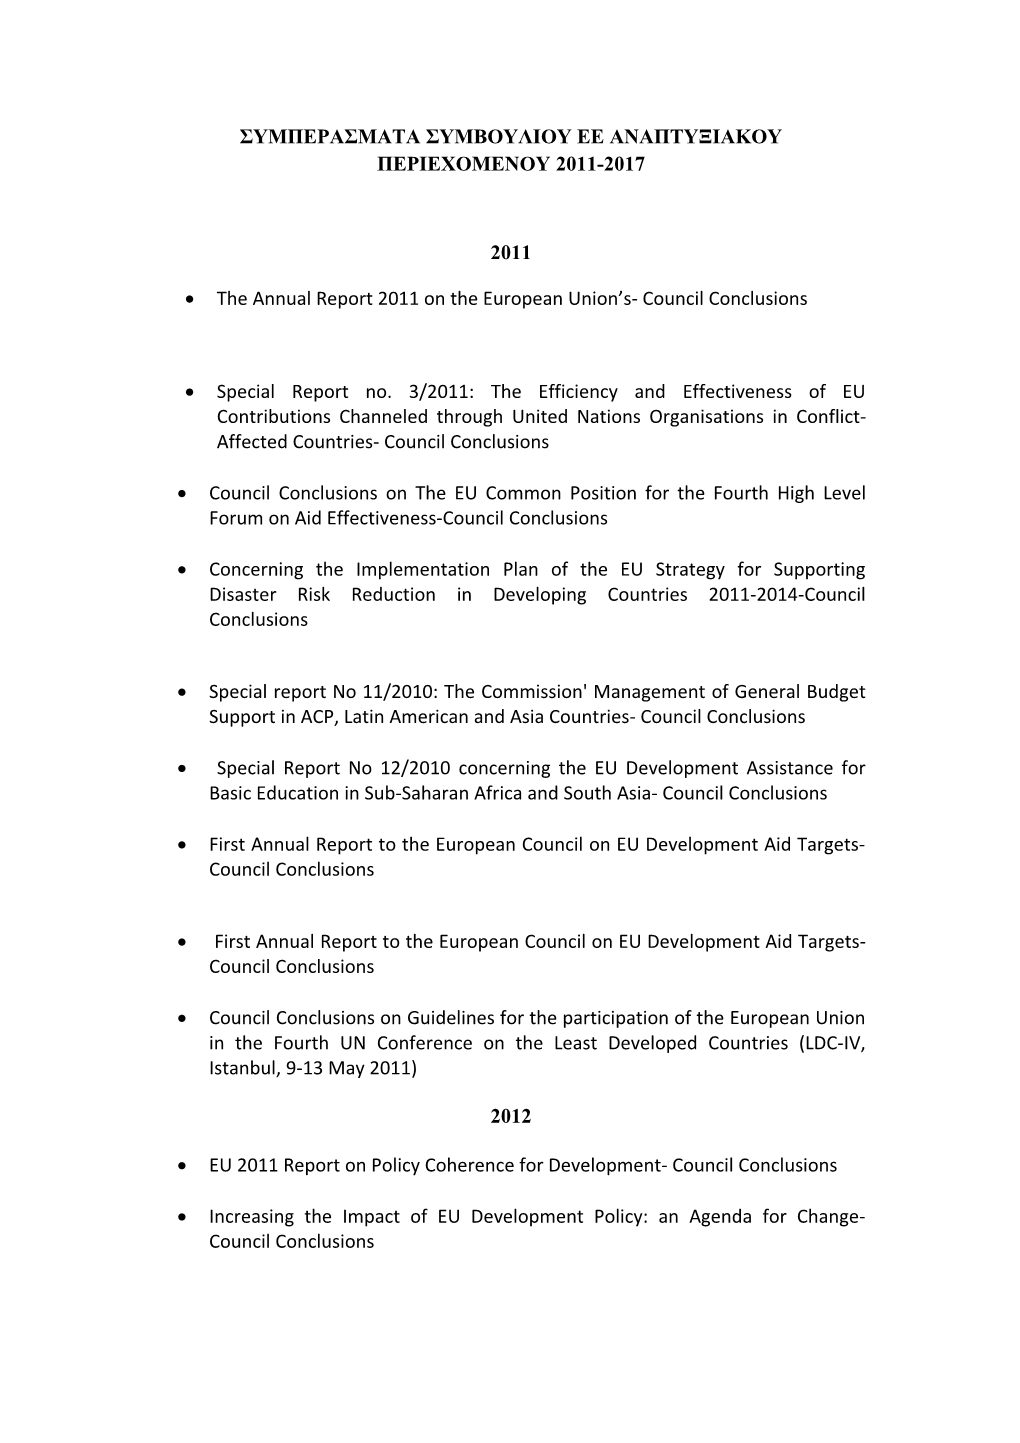 The Annual Report 2011 on the European Union S- Council Conclusions